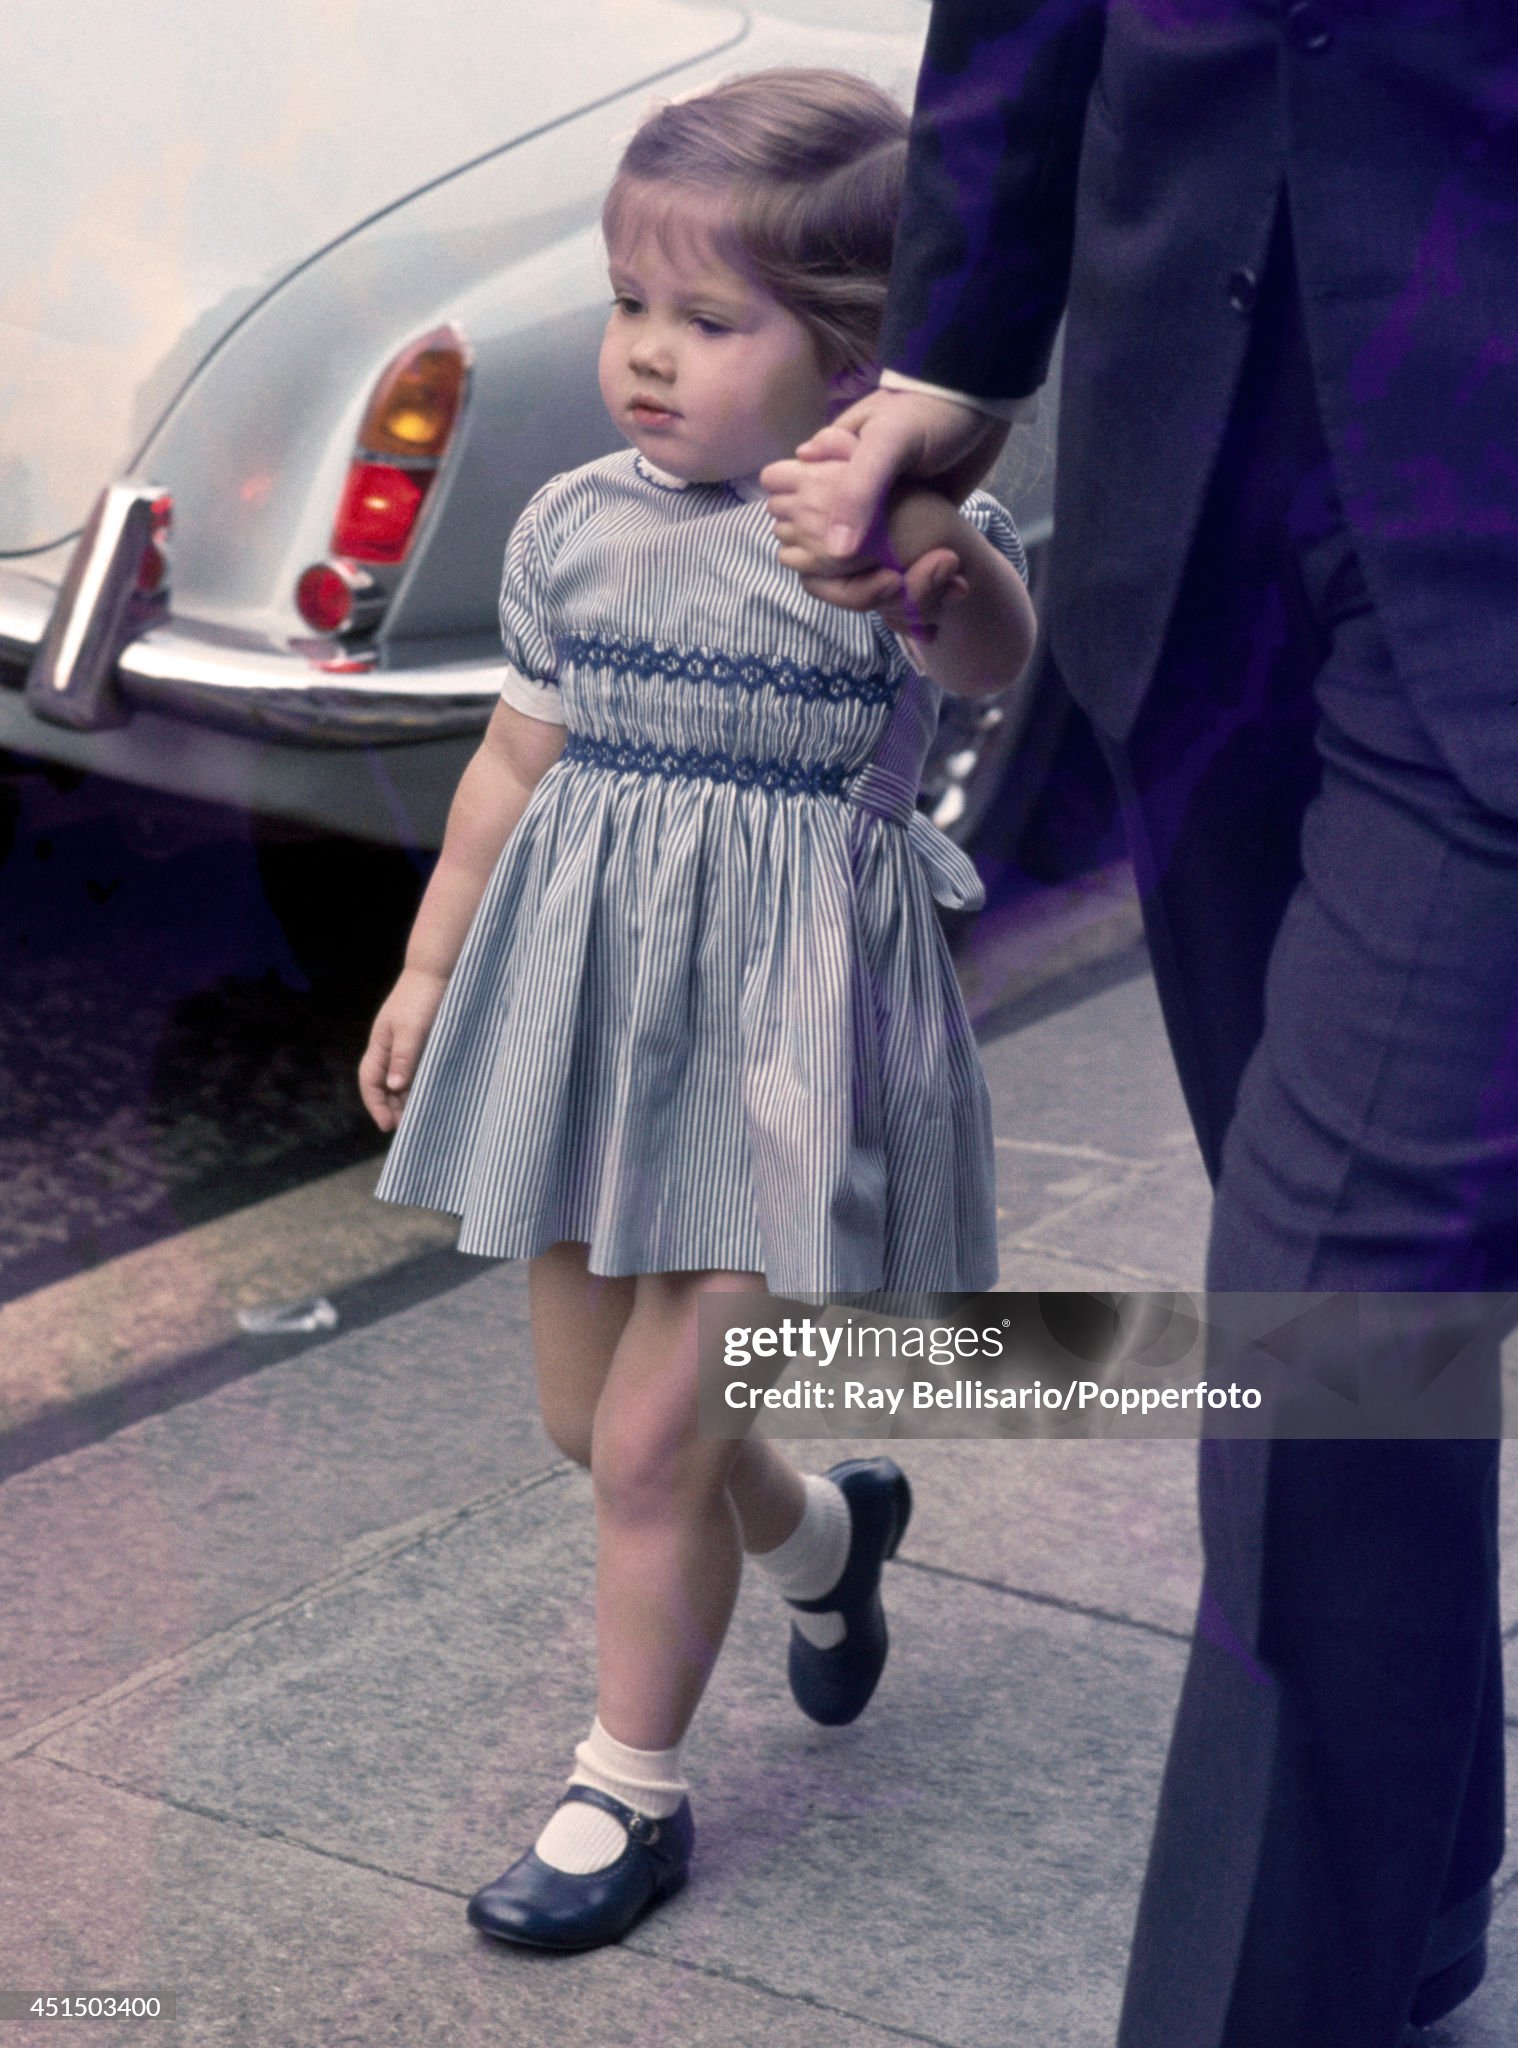 princess-alexia-of-greece-walking-with-her-father-king-constantine-in-london-on-23rd-may-1968.jpg